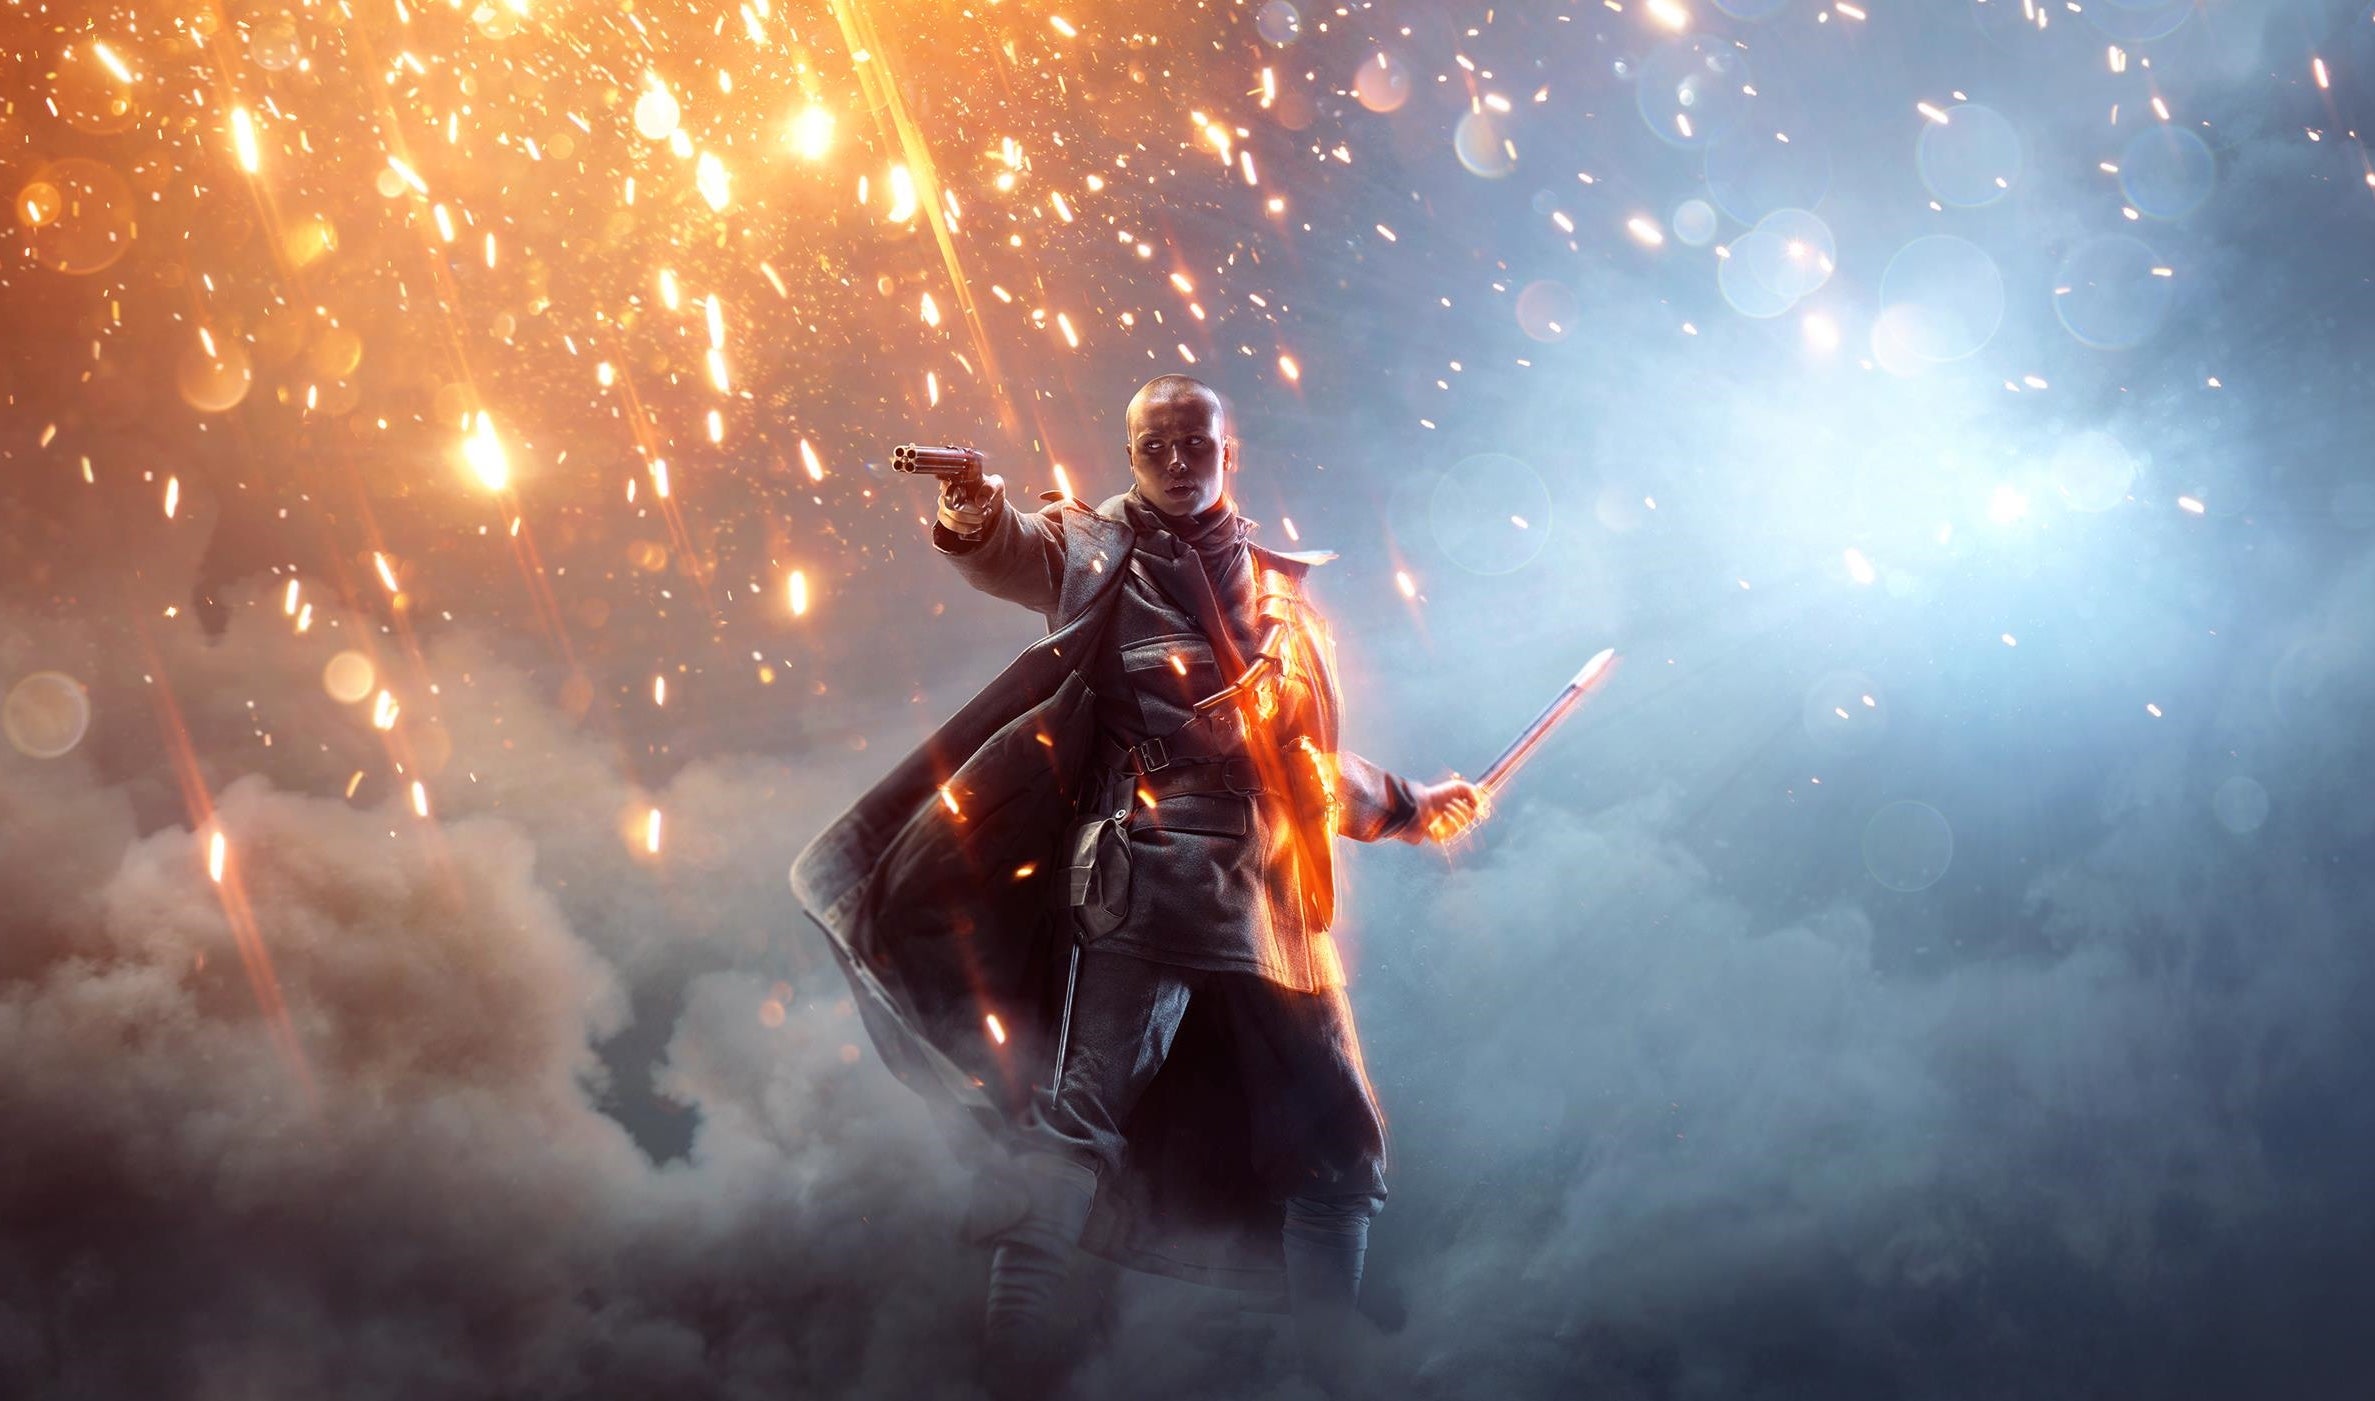 Image for Battlefield 1 is finally getting Xbox One X support in upcoming summer patch